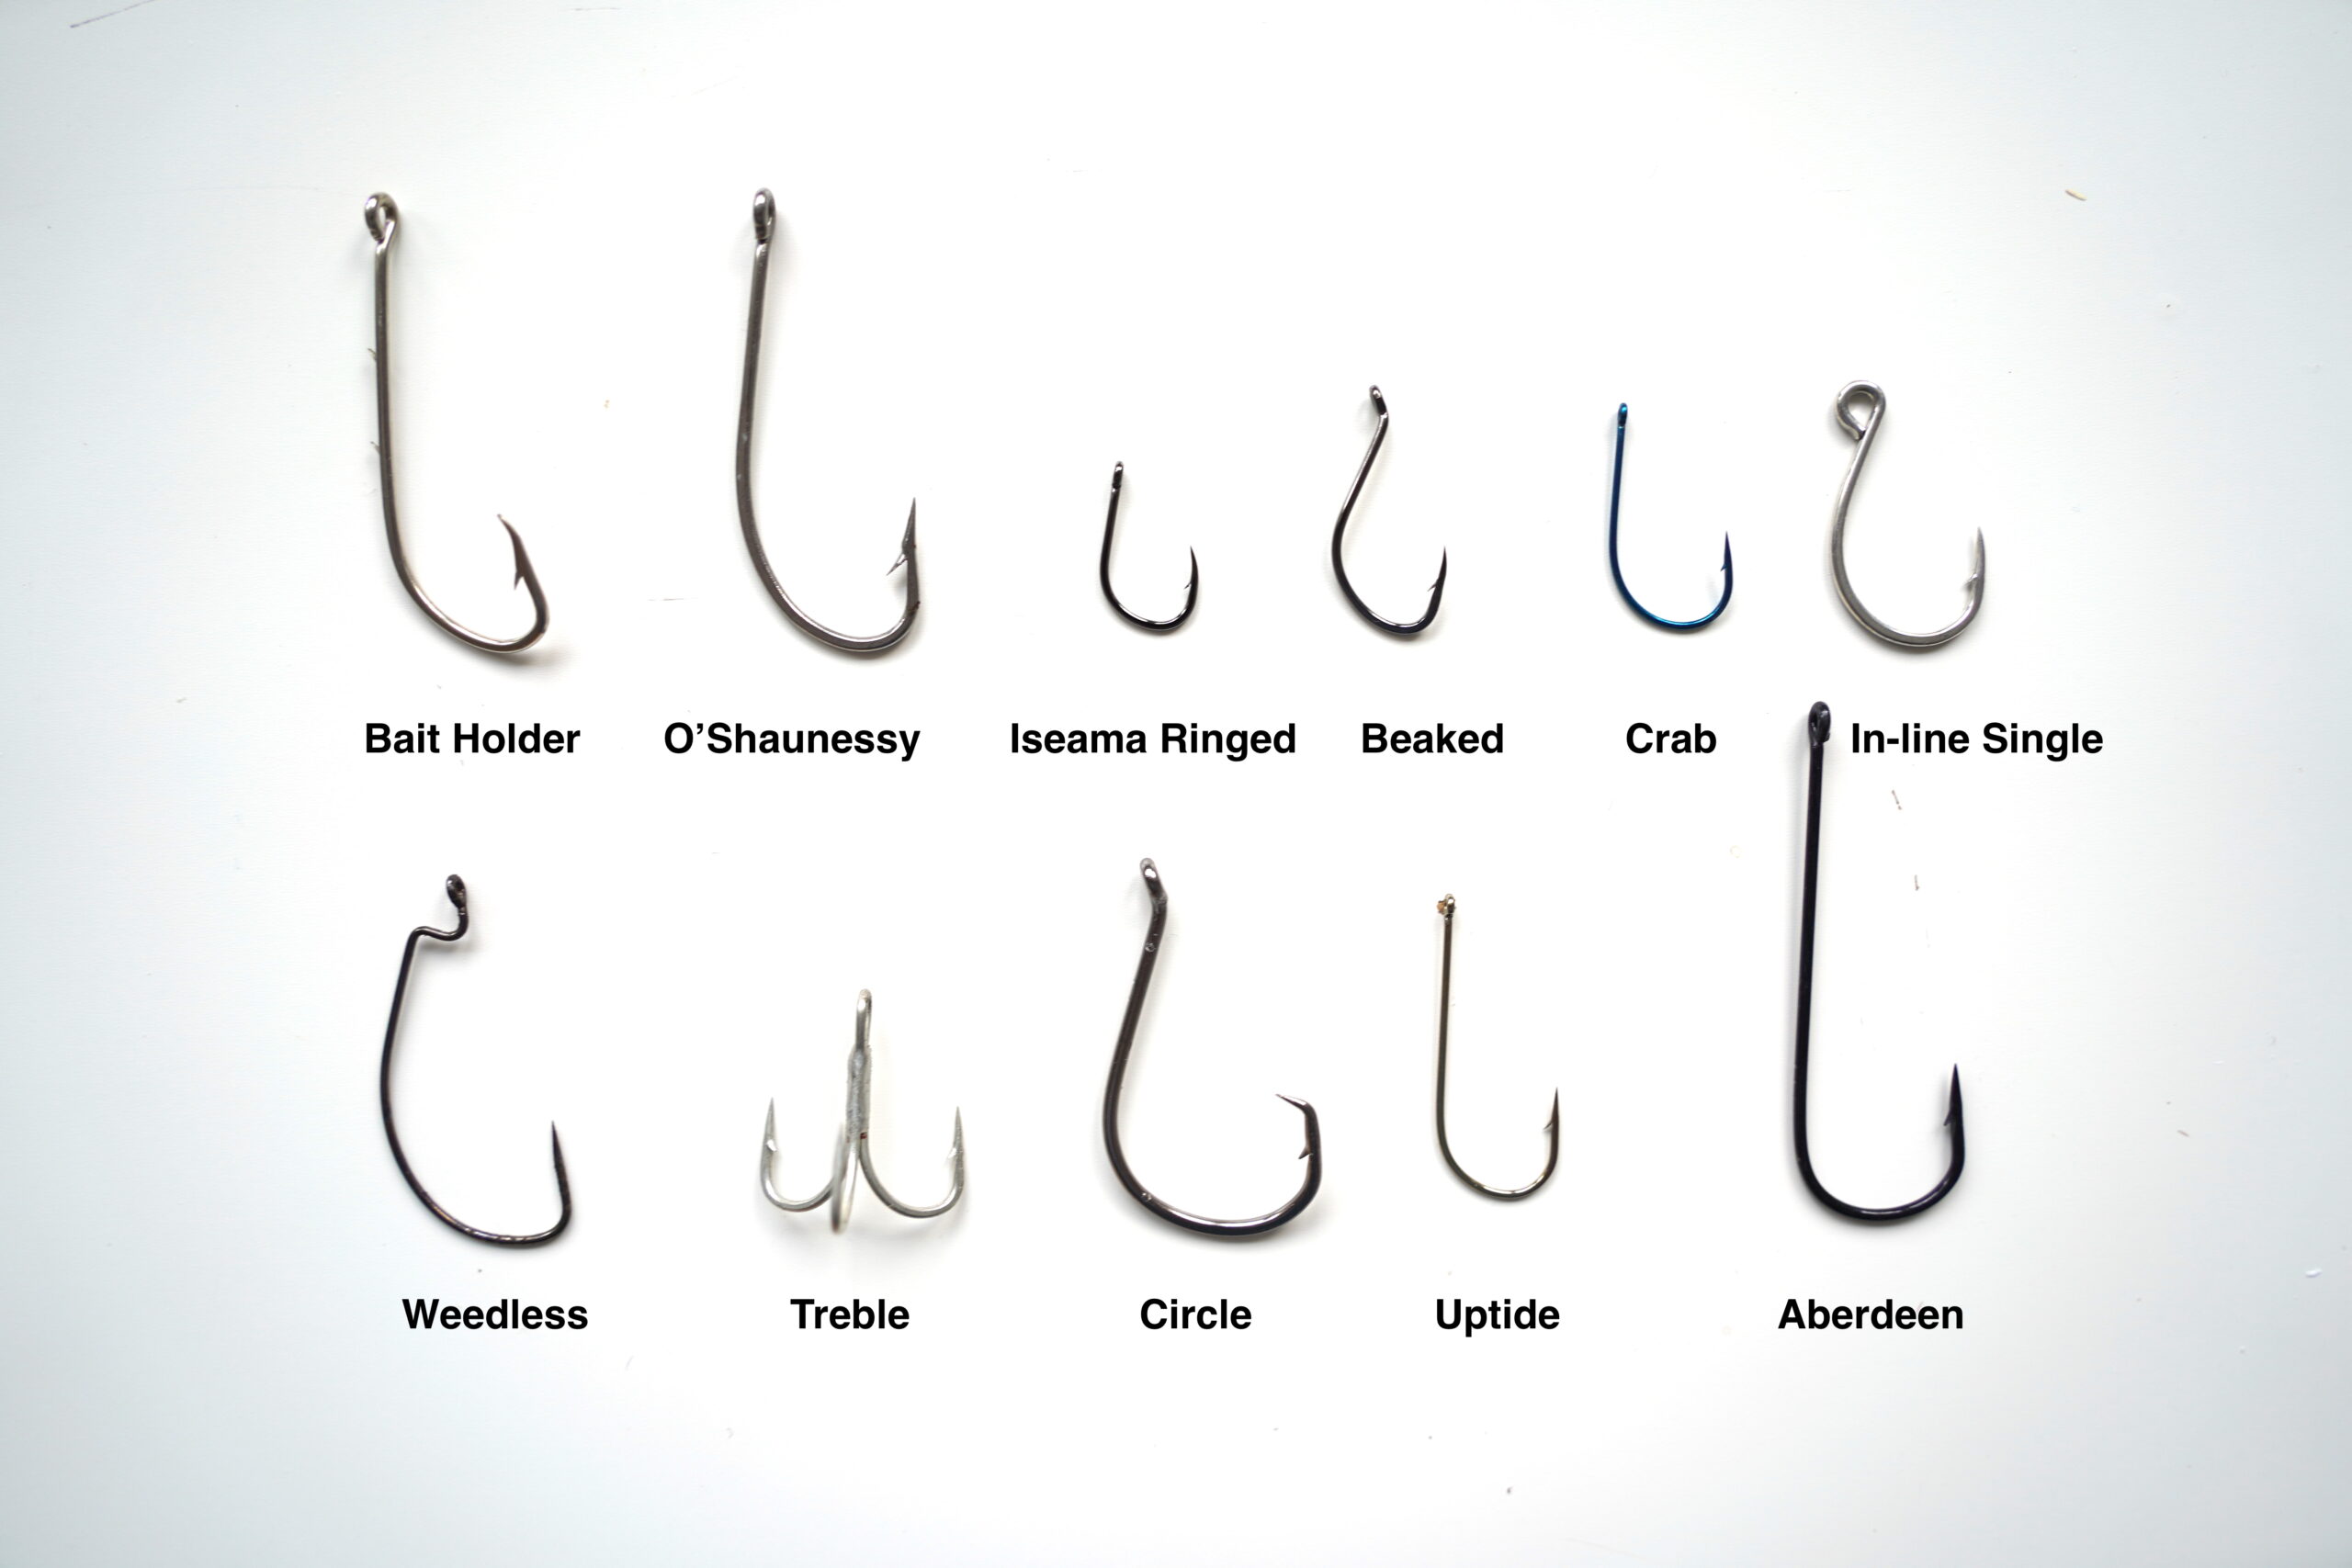 What is the purpose of having different sizes of hooks for